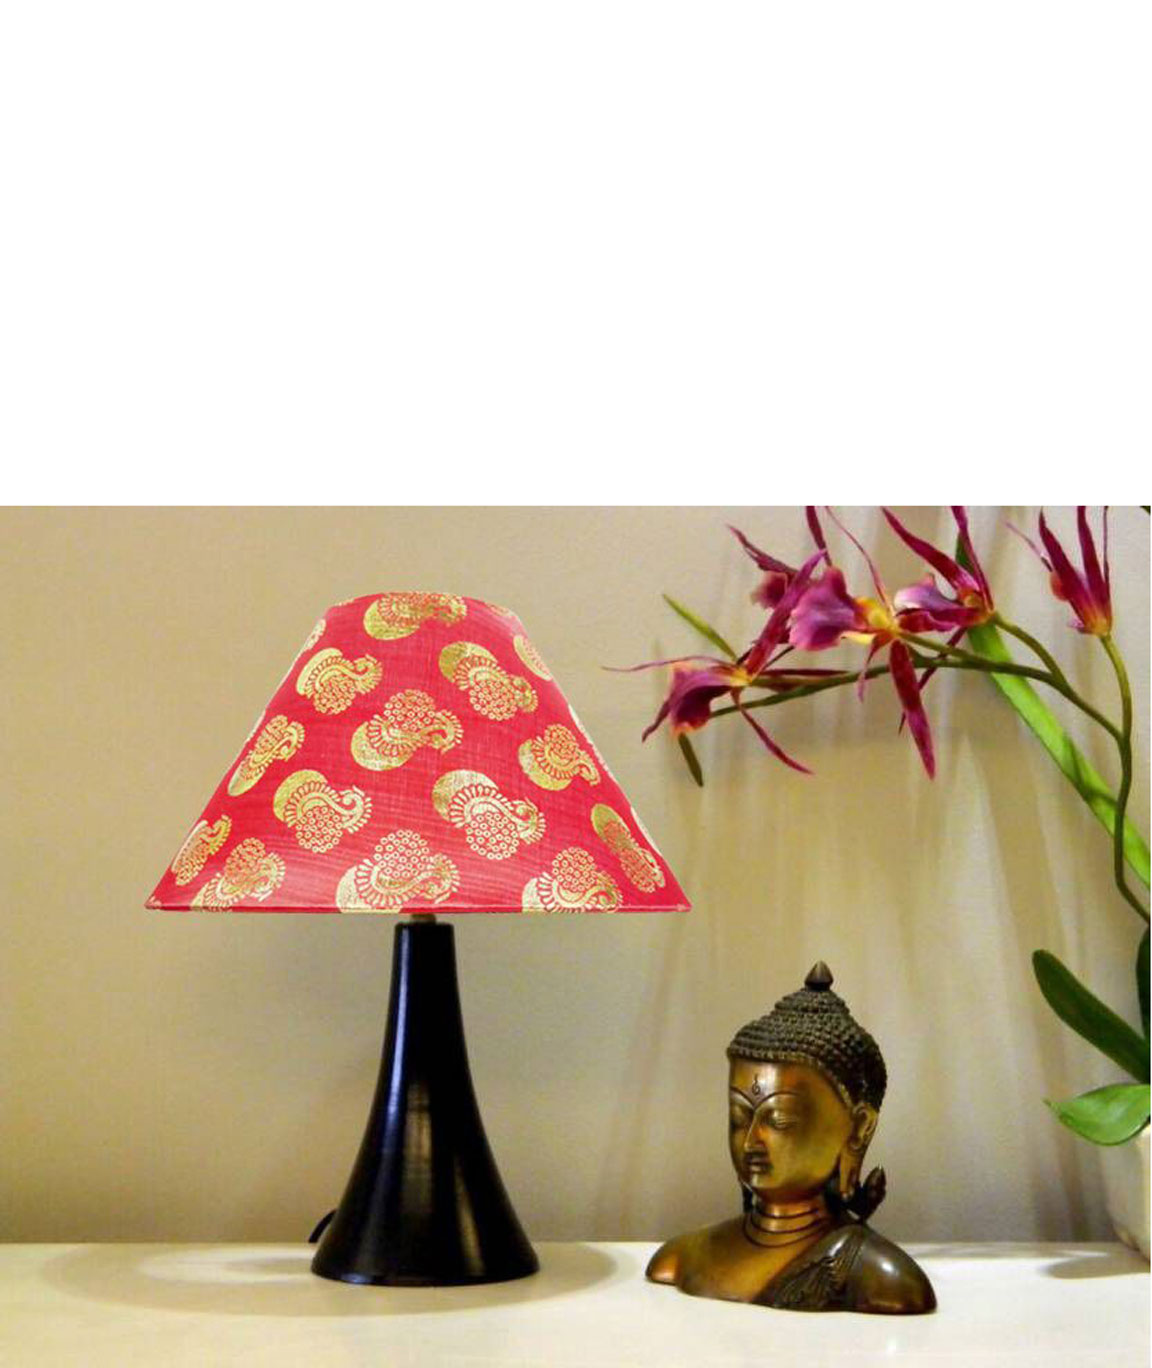 RDC Black Conical Stand Table Lamp with 10 Inches Round Red Golden Designer Lamp Shade